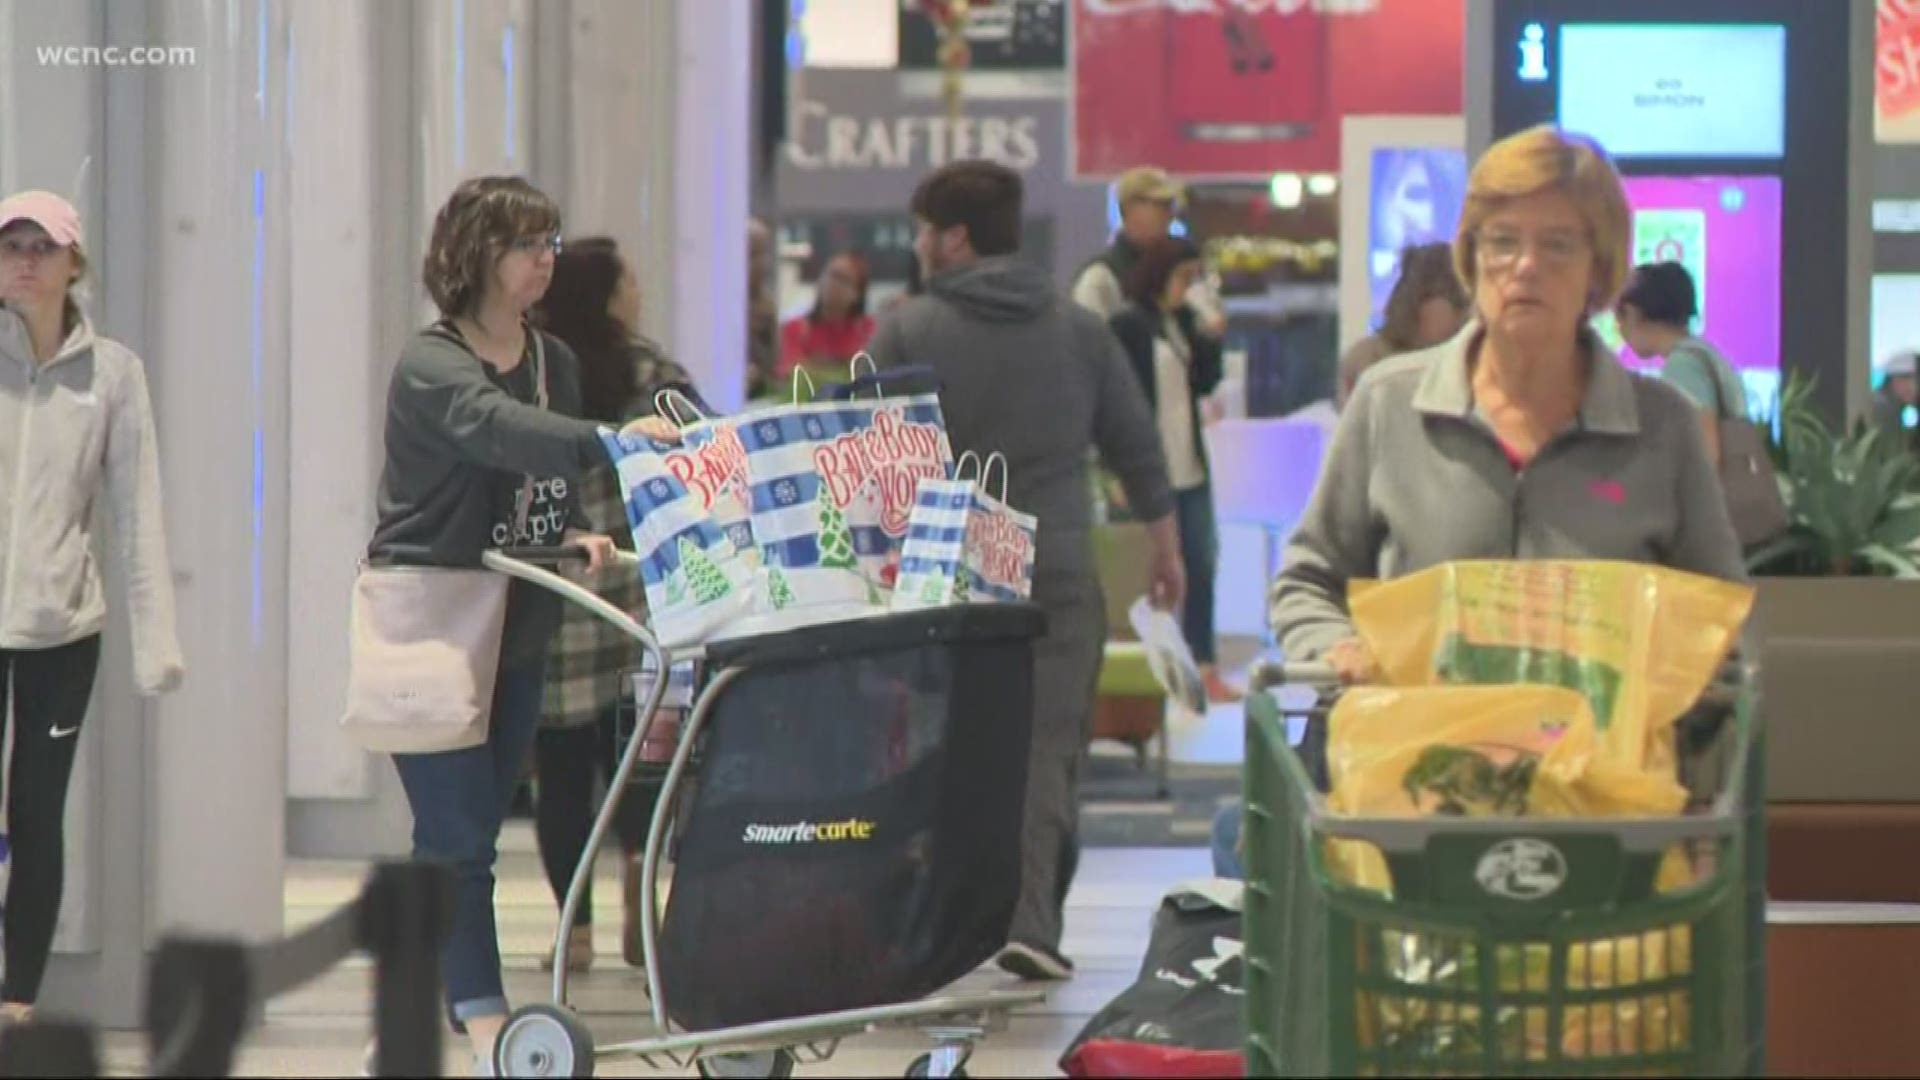 People camped out in front of Concord Mills to be first in line on Black Friday -- it started at 6 p.m. on Thanksgiving Day.